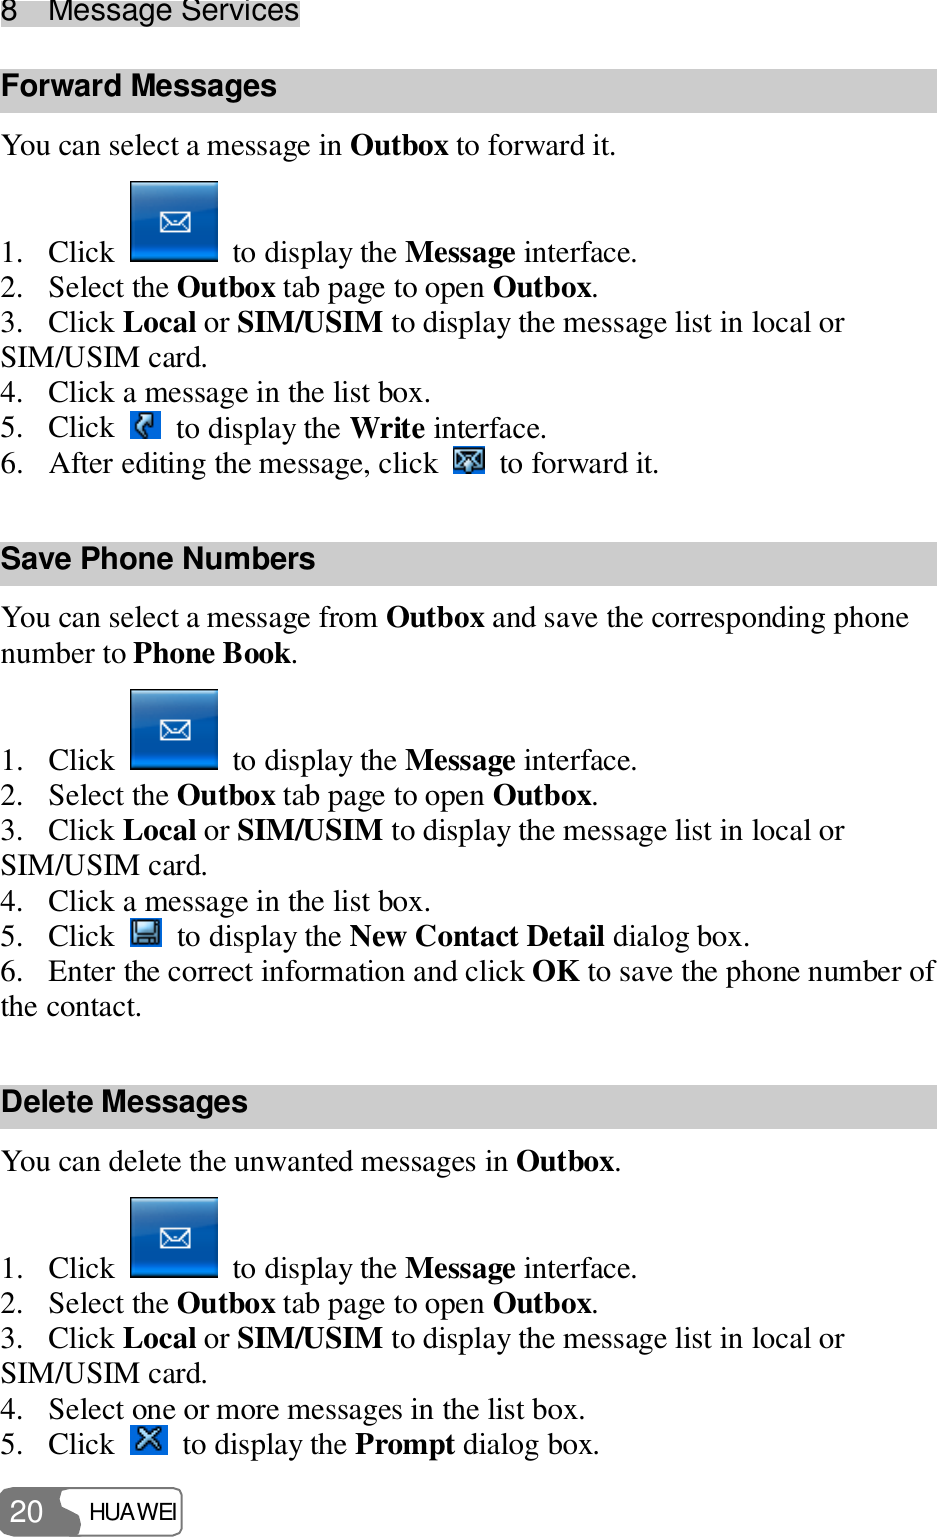 8  Message Services HUAWEI  20 Forward Messages You can select a message in Outbox to forward it. 1. Click   to display the Message interface. 2. Select the Outbox tab page to open Outbox. 3. Click Local or SIM/USIM to display the message list in local or SIM/USIM card. 4. Click a message in the list box. 5. Click   to display the Write interface. 6. After editing the message, click   to forward it. Save Phone Numbers You can select a message from Outbox and save the corresponding phone number to Phone Book. 1. Click   to display the Message interface. 2. Select the Outbox tab page to open Outbox. 3. Click Local or SIM/USIM to display the message list in local or SIM/USIM card. 4. Click a message in the list box. 5. Click   to display the New Contact Detail dialog box. 6. Enter the correct information and click OK to save the phone number of the contact. Delete Messages You can delete the unwanted messages in Outbox. 1. Click   to display the Message interface. 2. Select the Outbox tab page to open Outbox. 3. Click Local or SIM/USIM to display the message list in local or SIM/USIM card. 4. Select one or more messages in the list box. 5. Click   to display the Prompt dialog box. 